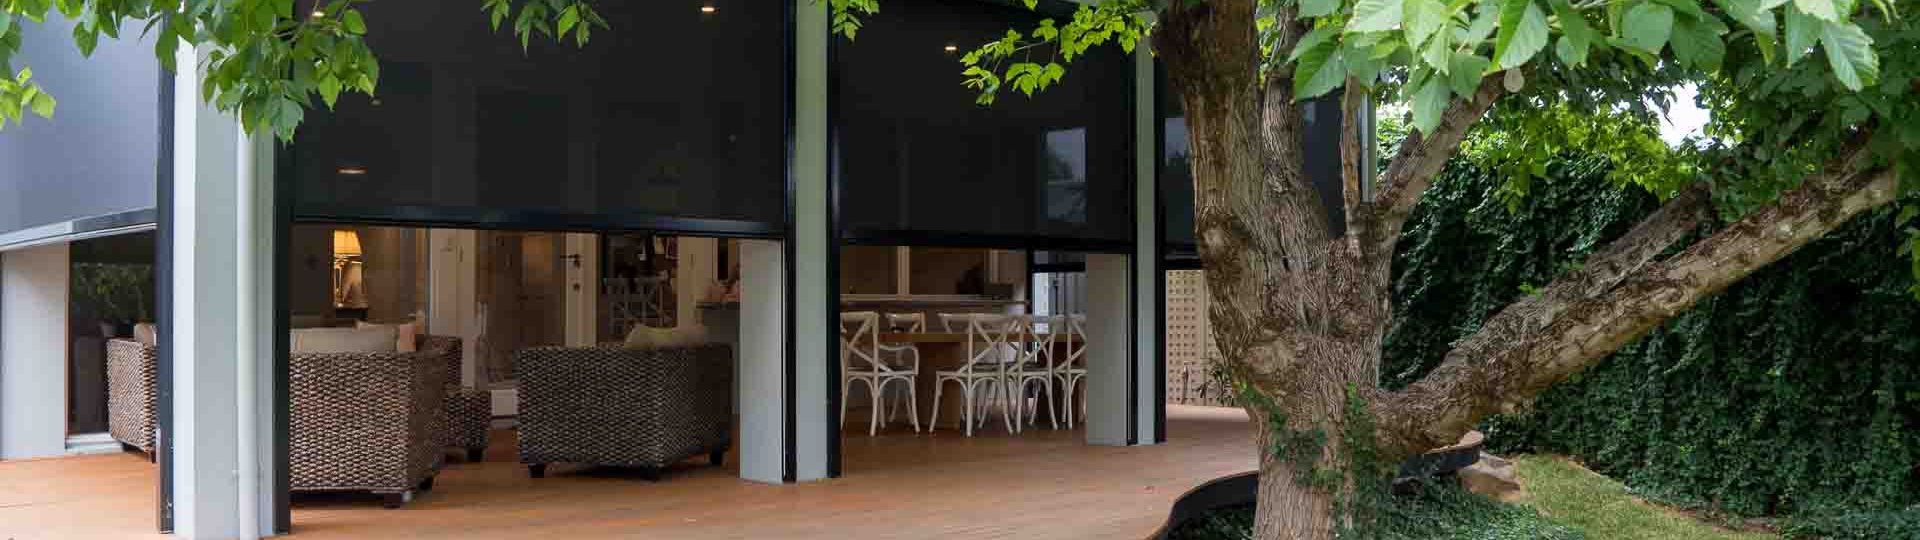 Outdoor Blinds - Looking for a outdoor blinds installation? Get a free measure and quote in Adelaide, Sydney, Melbourne, Canberra, Brisbane, Perth. We install Australian Wide.